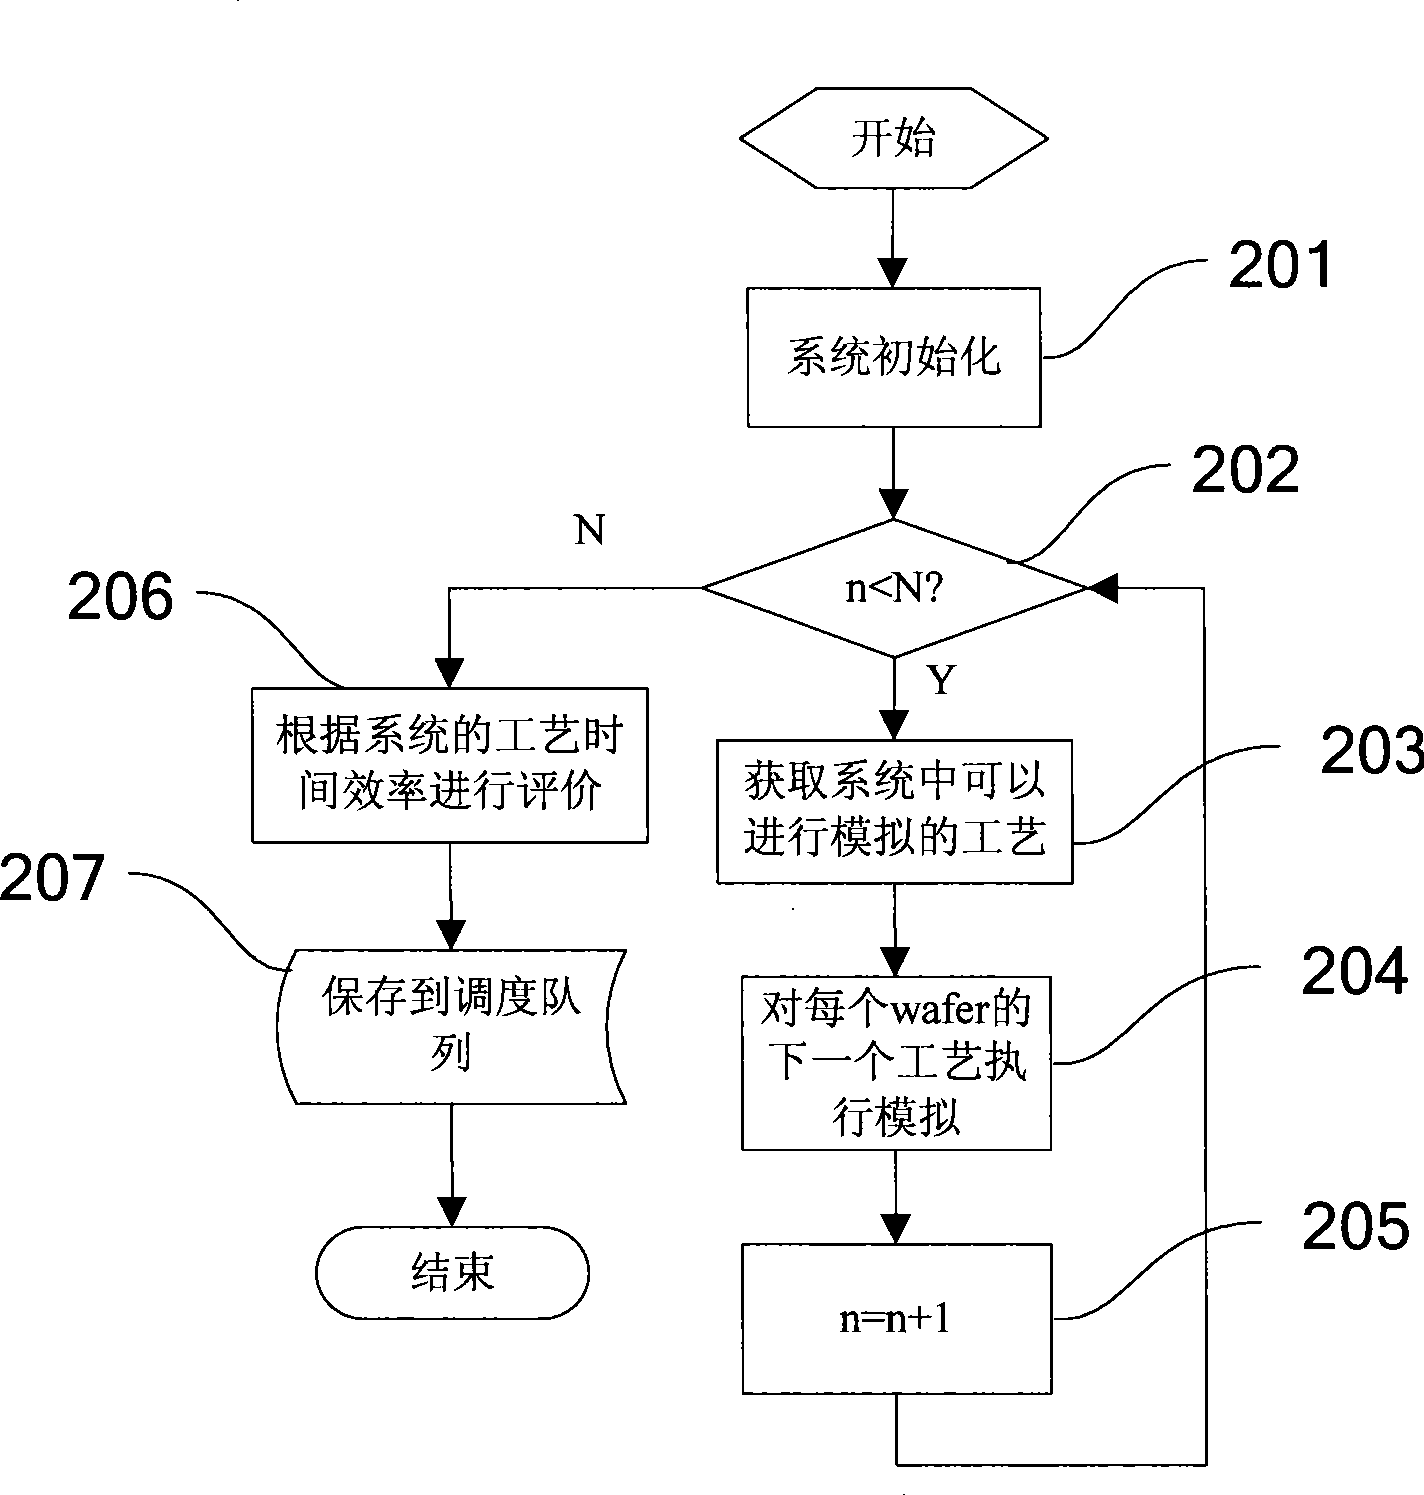 Method and device for wafer optimized scheduling